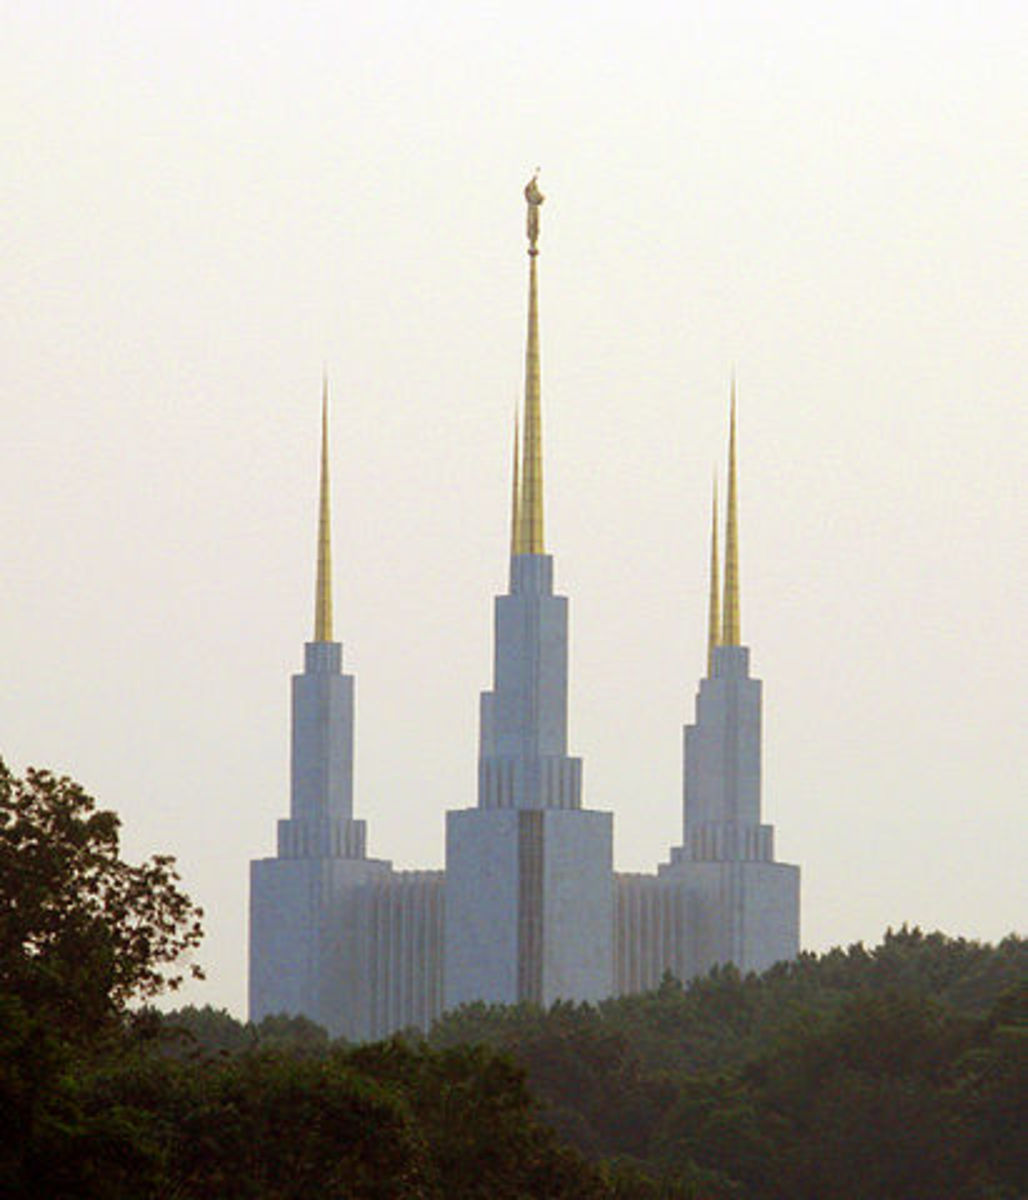 The Washington D.C. LDS Temple, as viewed from I495 in Forest Glen.